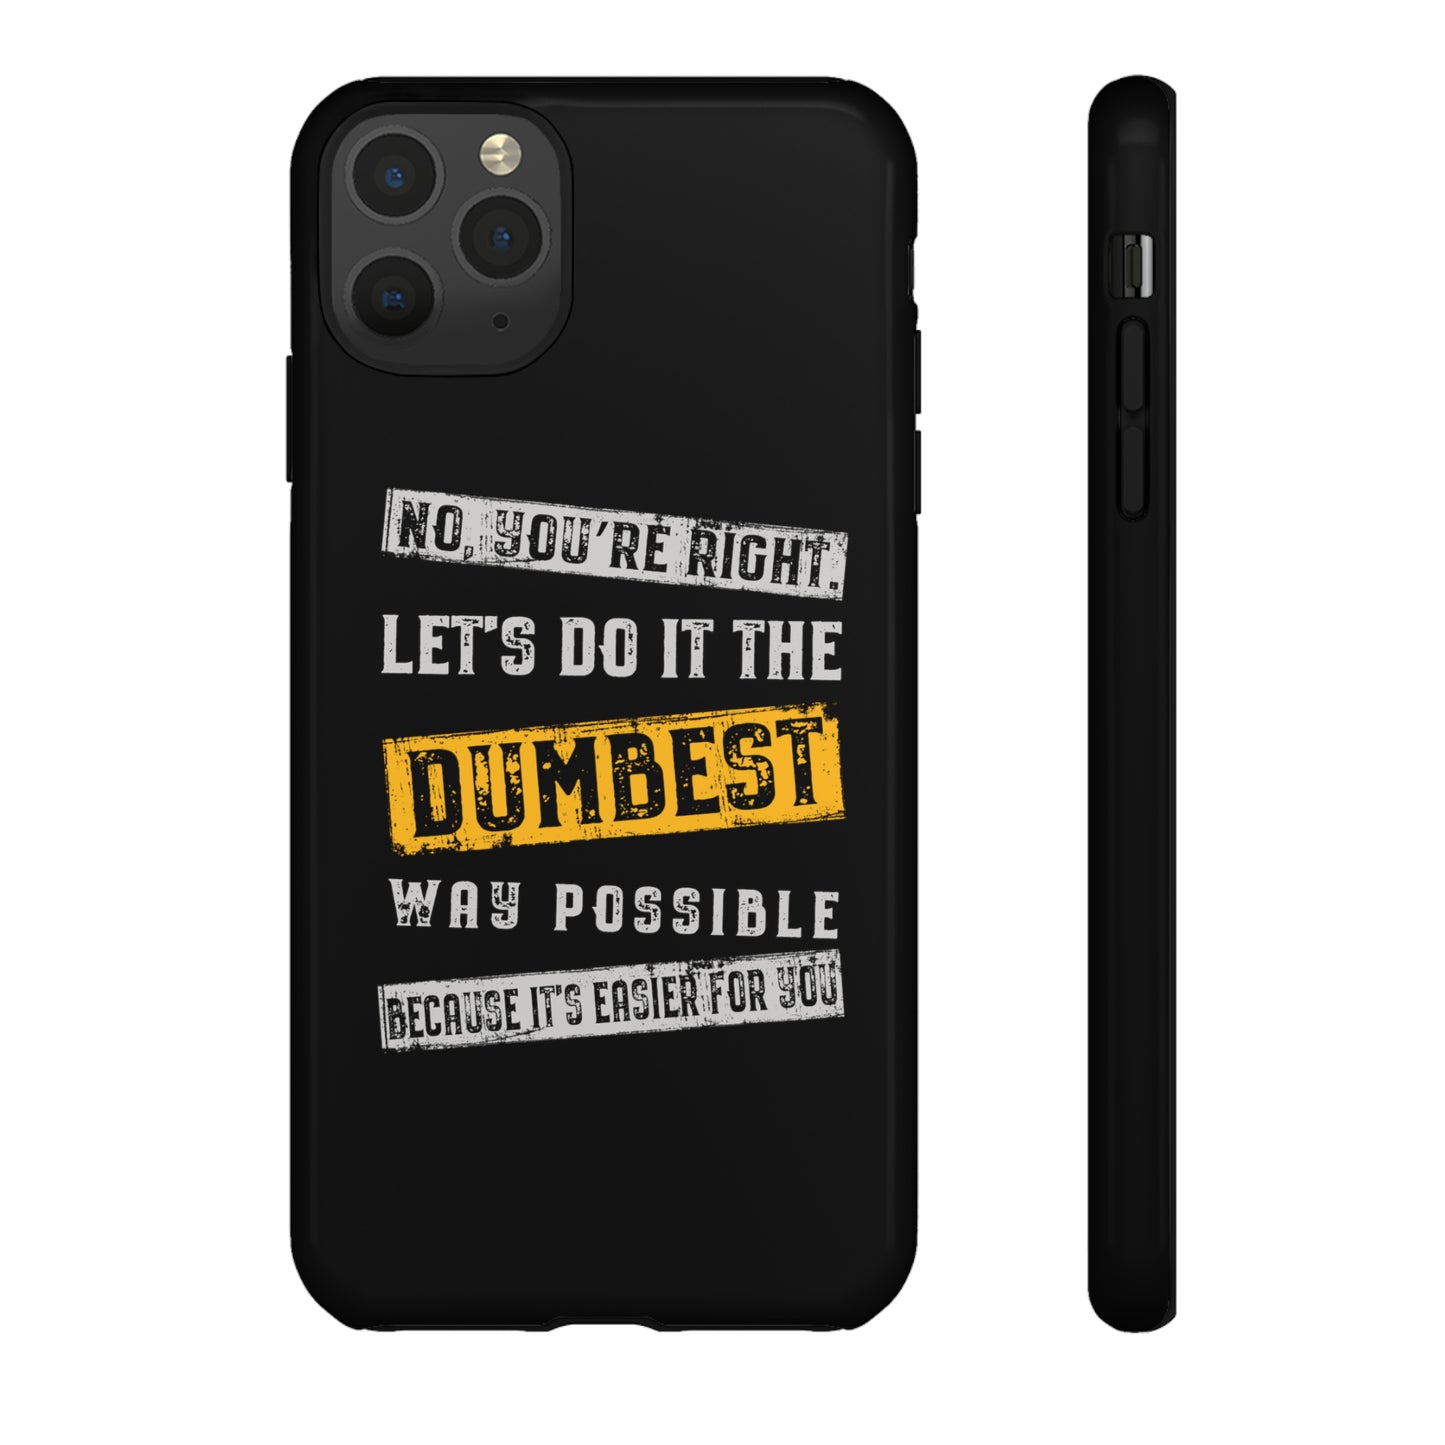 No You're Right Let's Do It the Dumbest Way Possible Phone Case